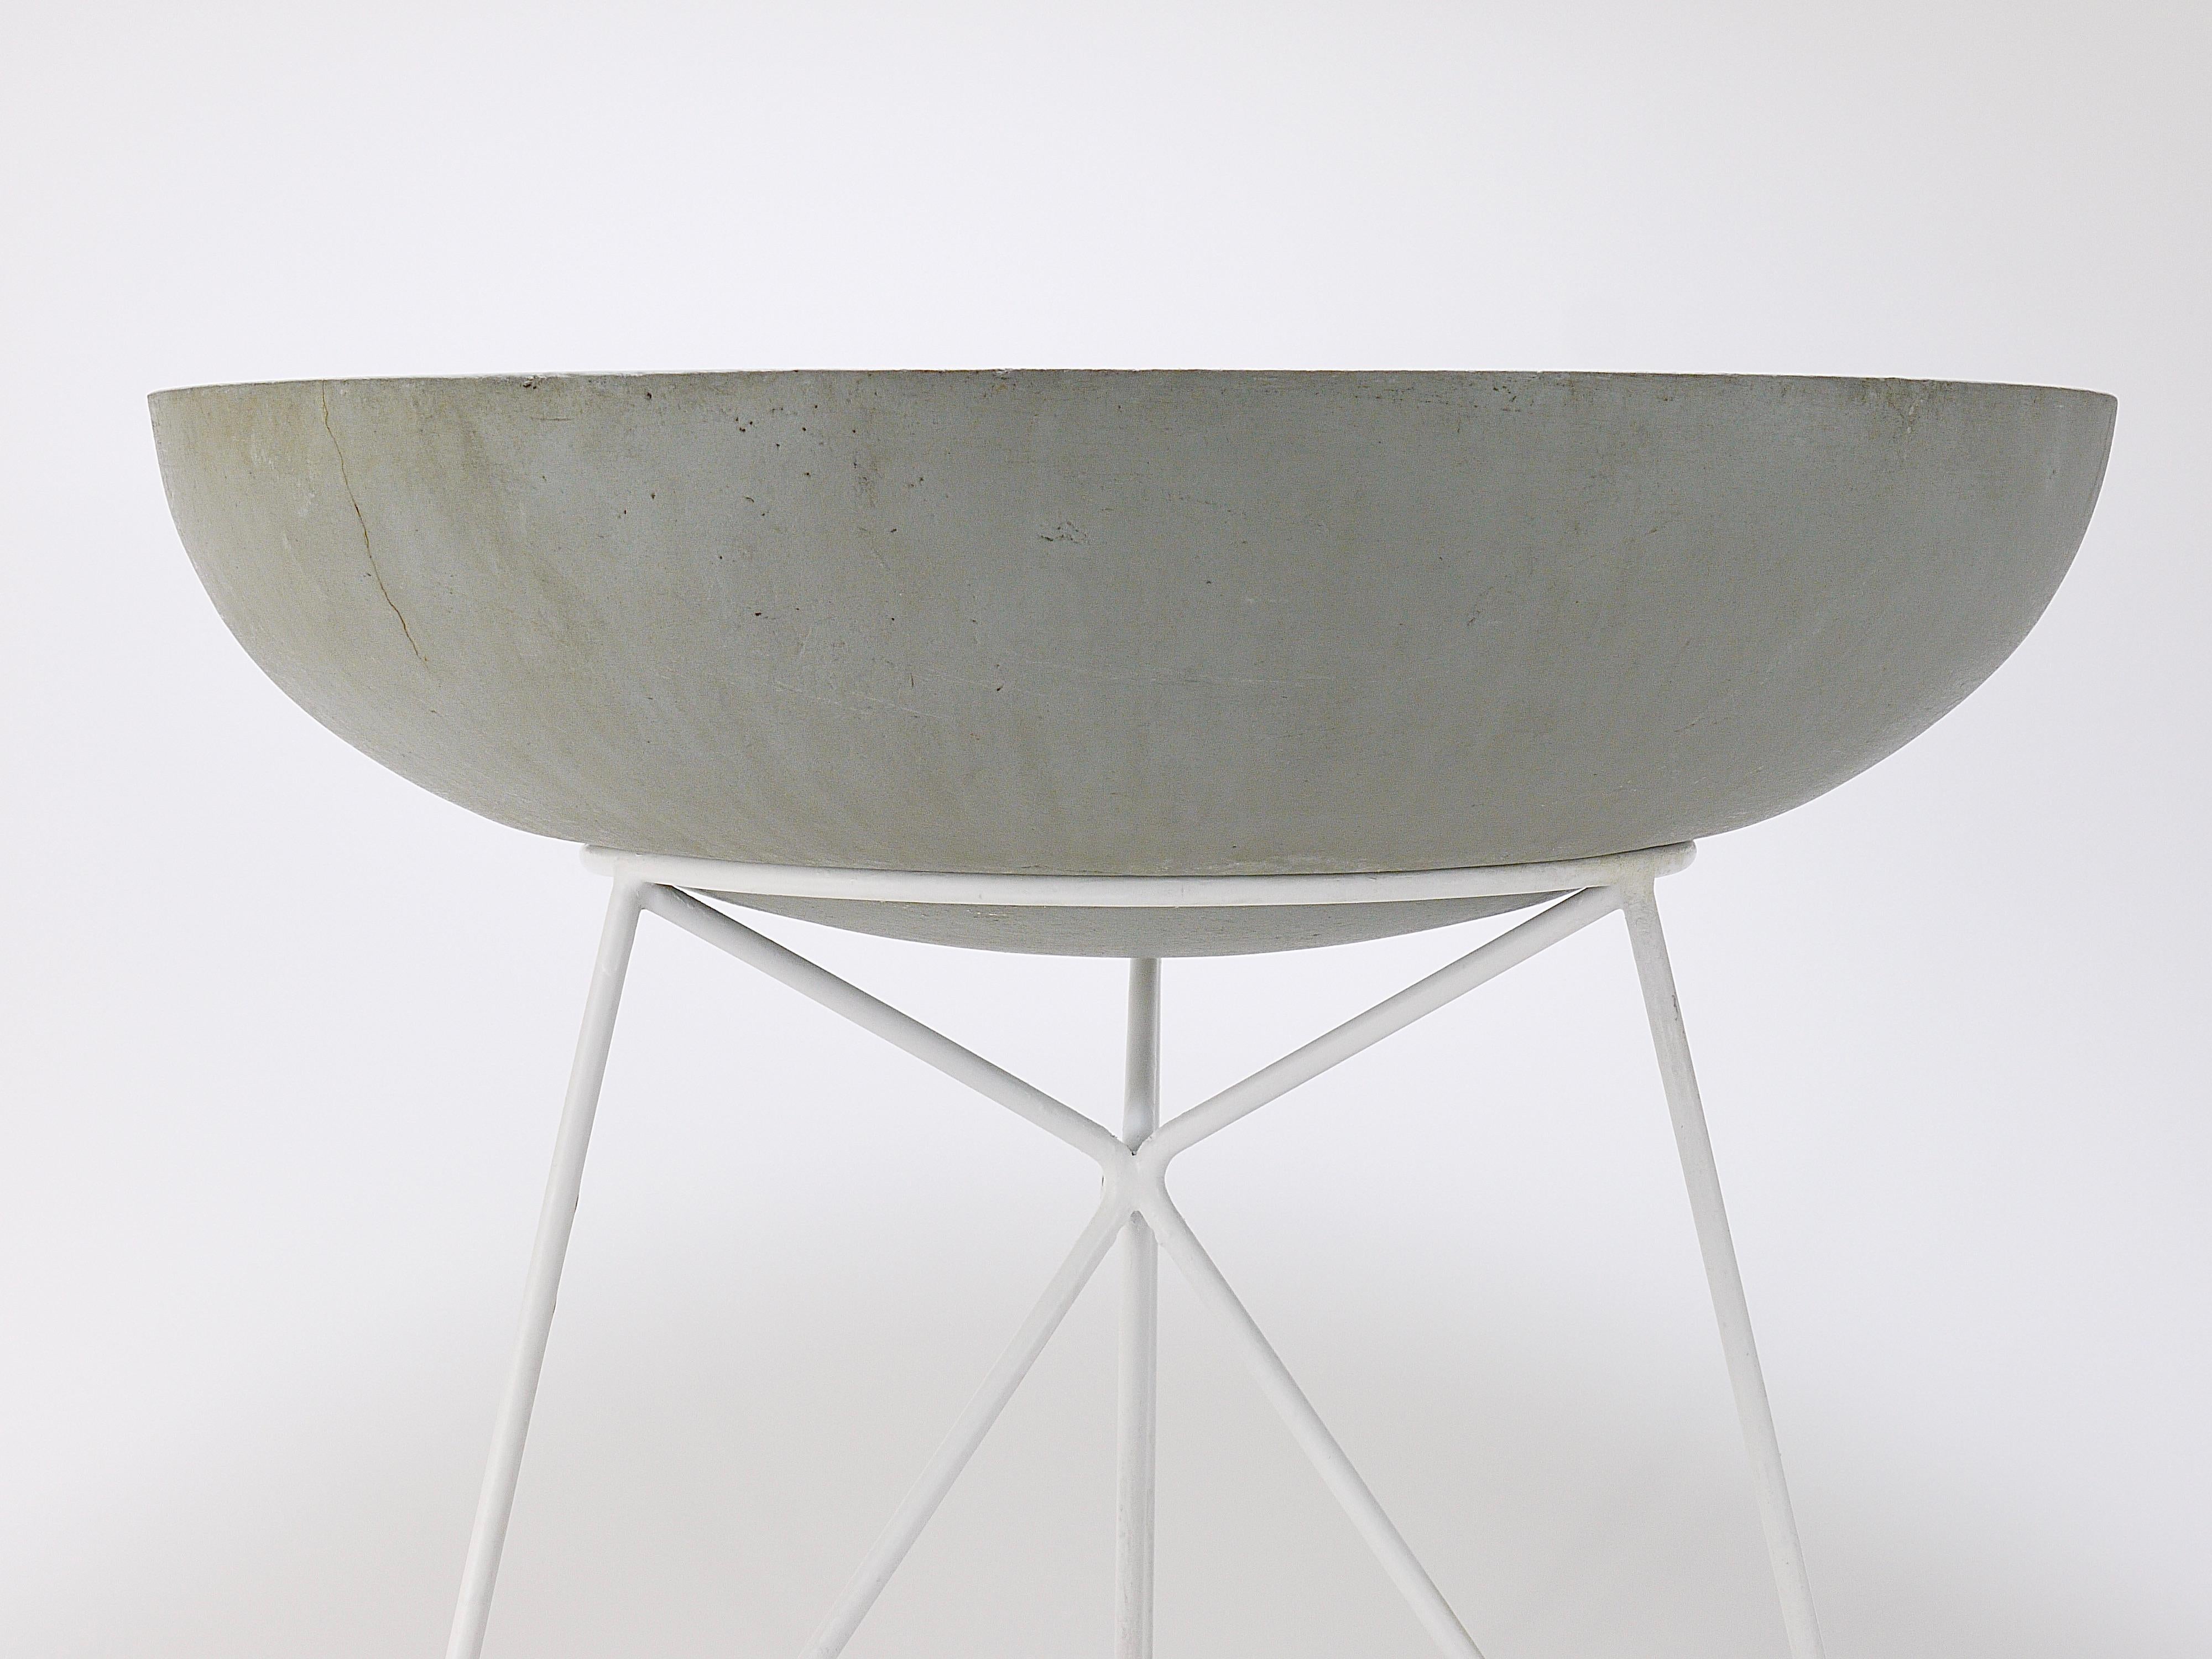 Two Large  Eternit Concrete Bowl Planters, Tripod Loop Base, Switzerland, 1950s In Good Condition For Sale In Vienna, AT